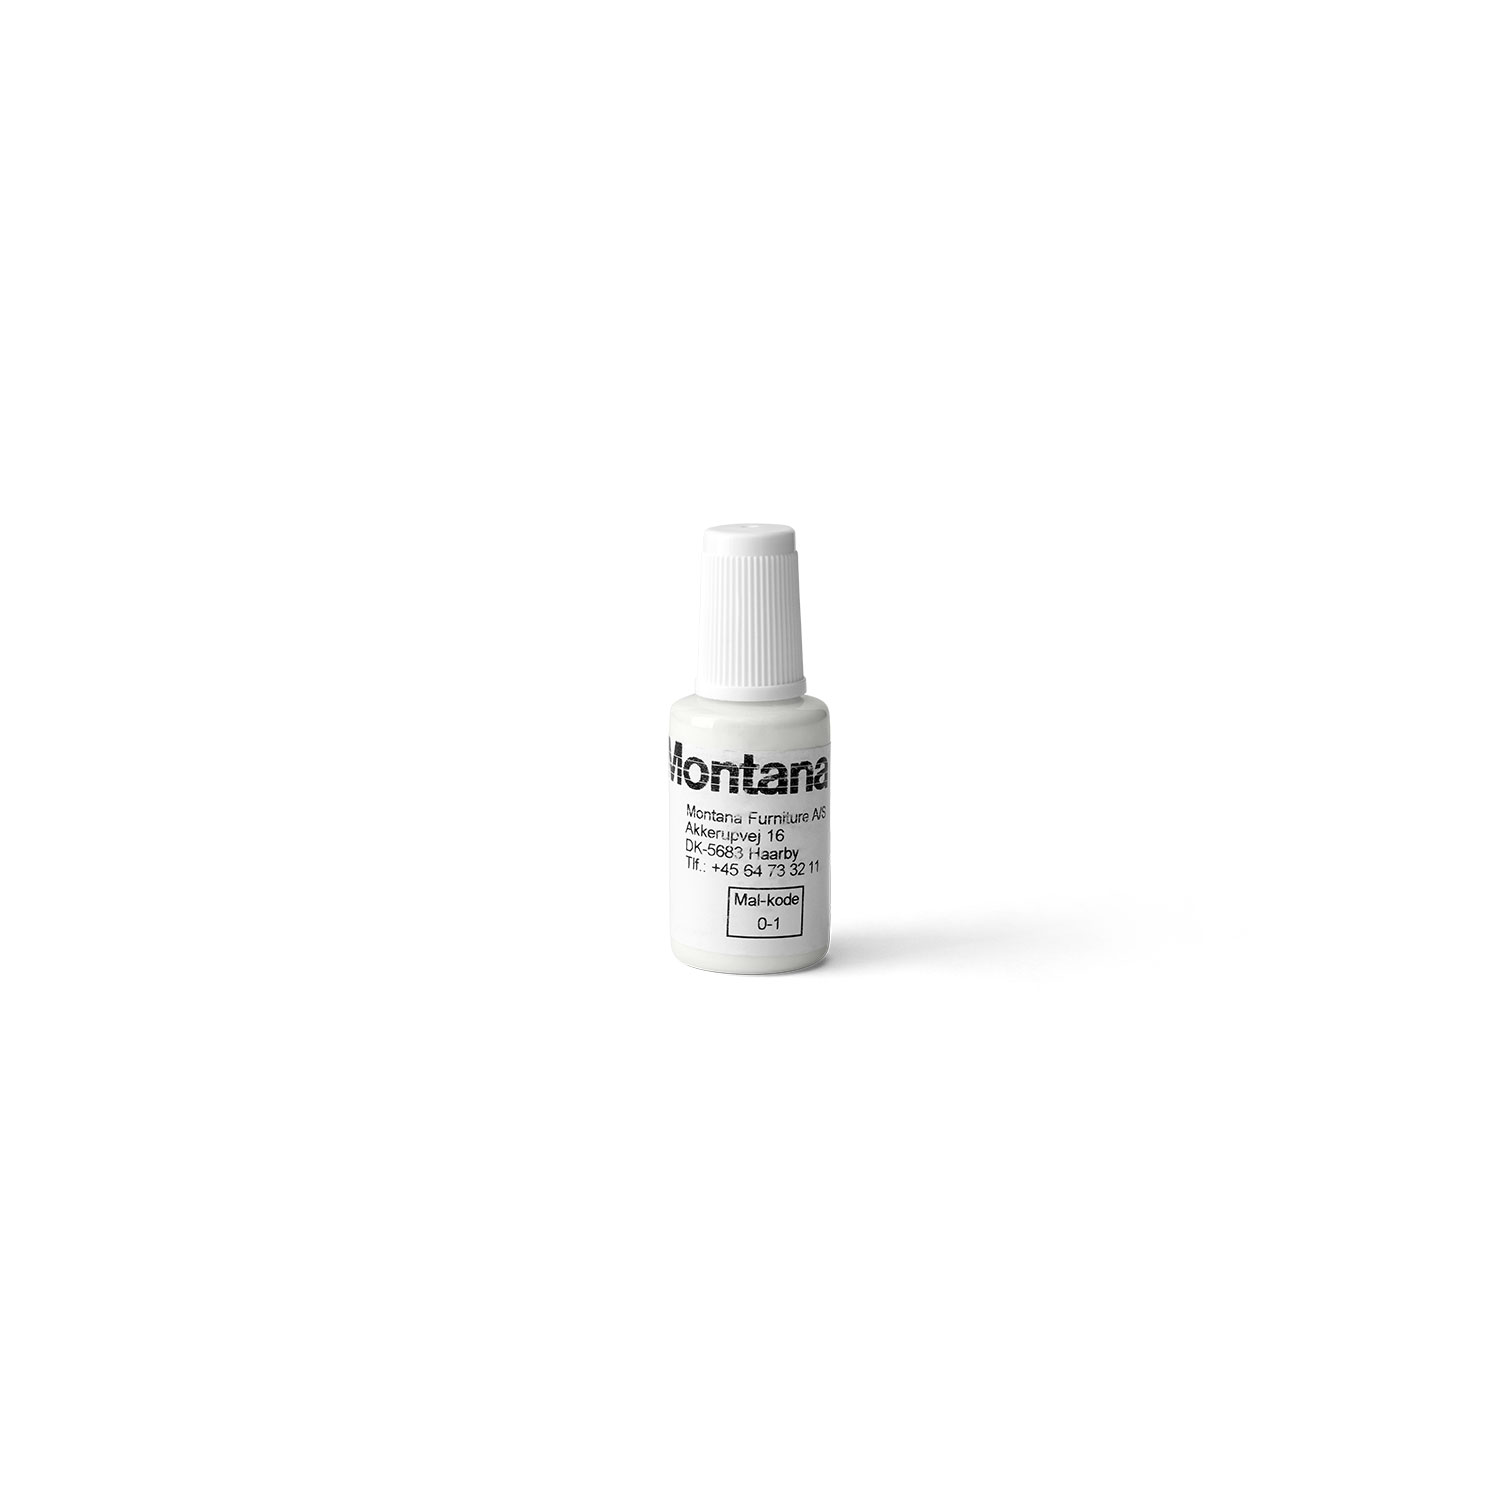 REPLAK touch-up lacquer, White